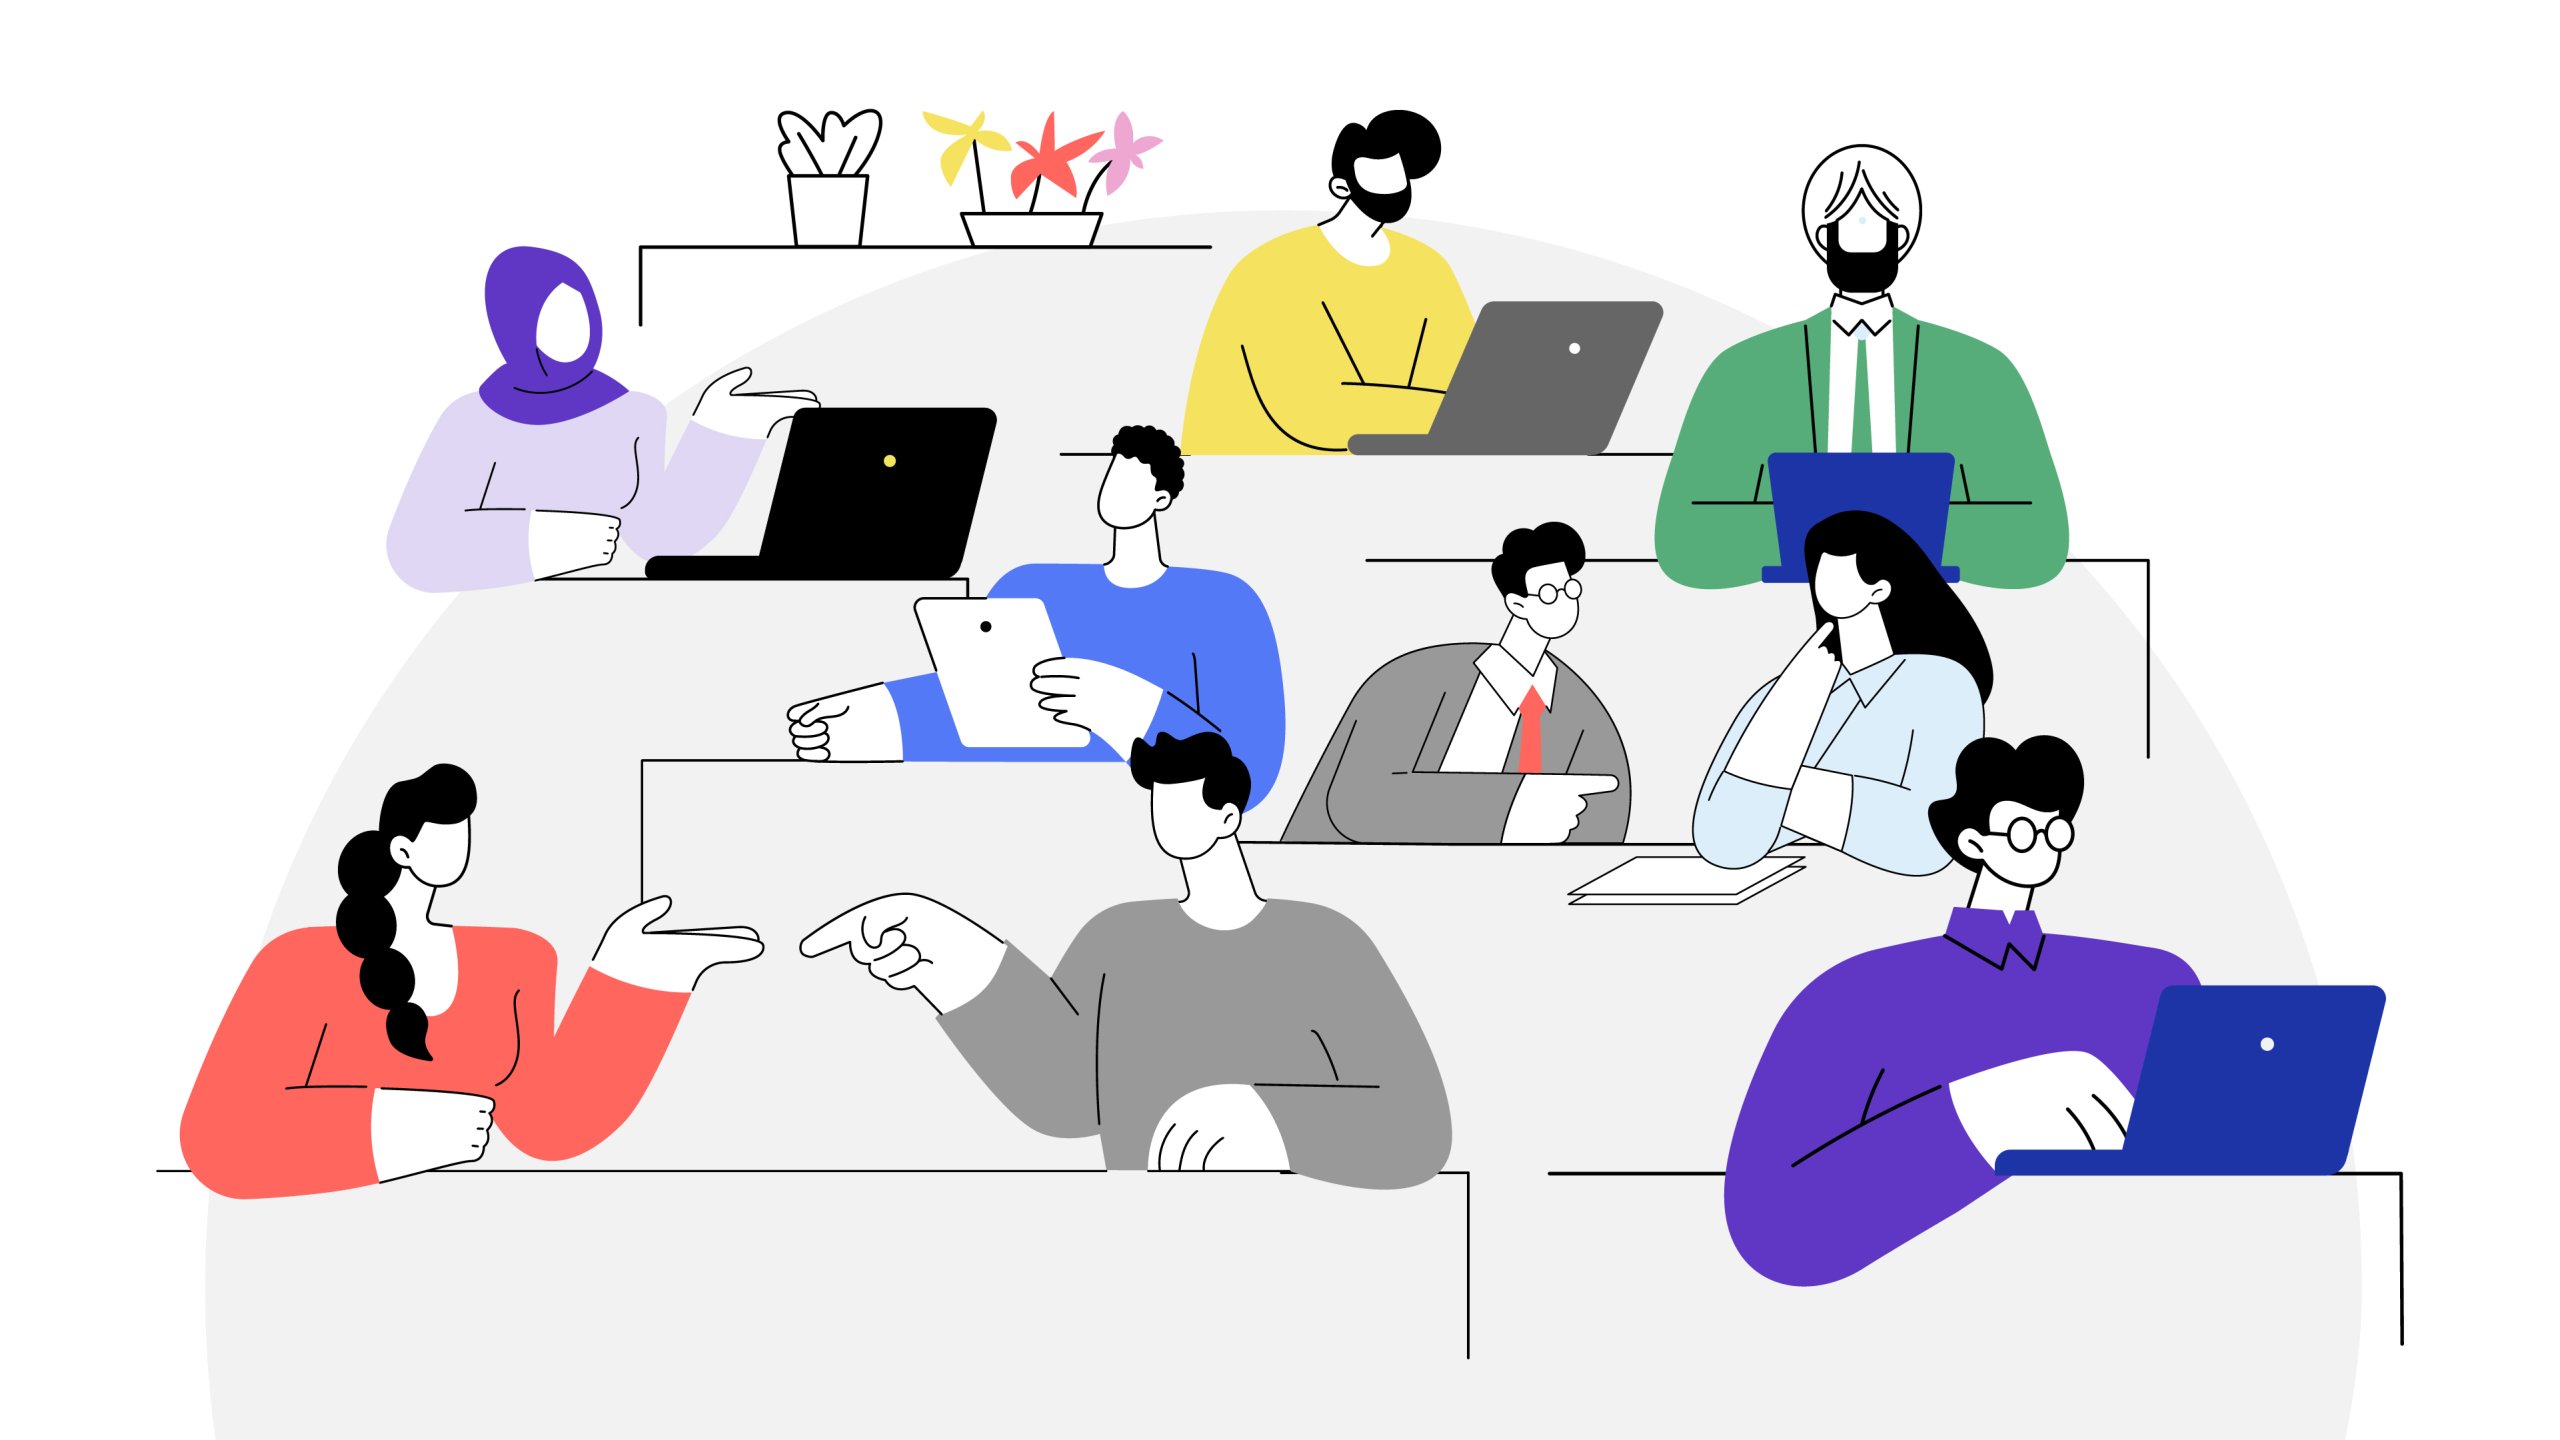 Illustration with a diverse group of people sitting in front of laptops, conversing.